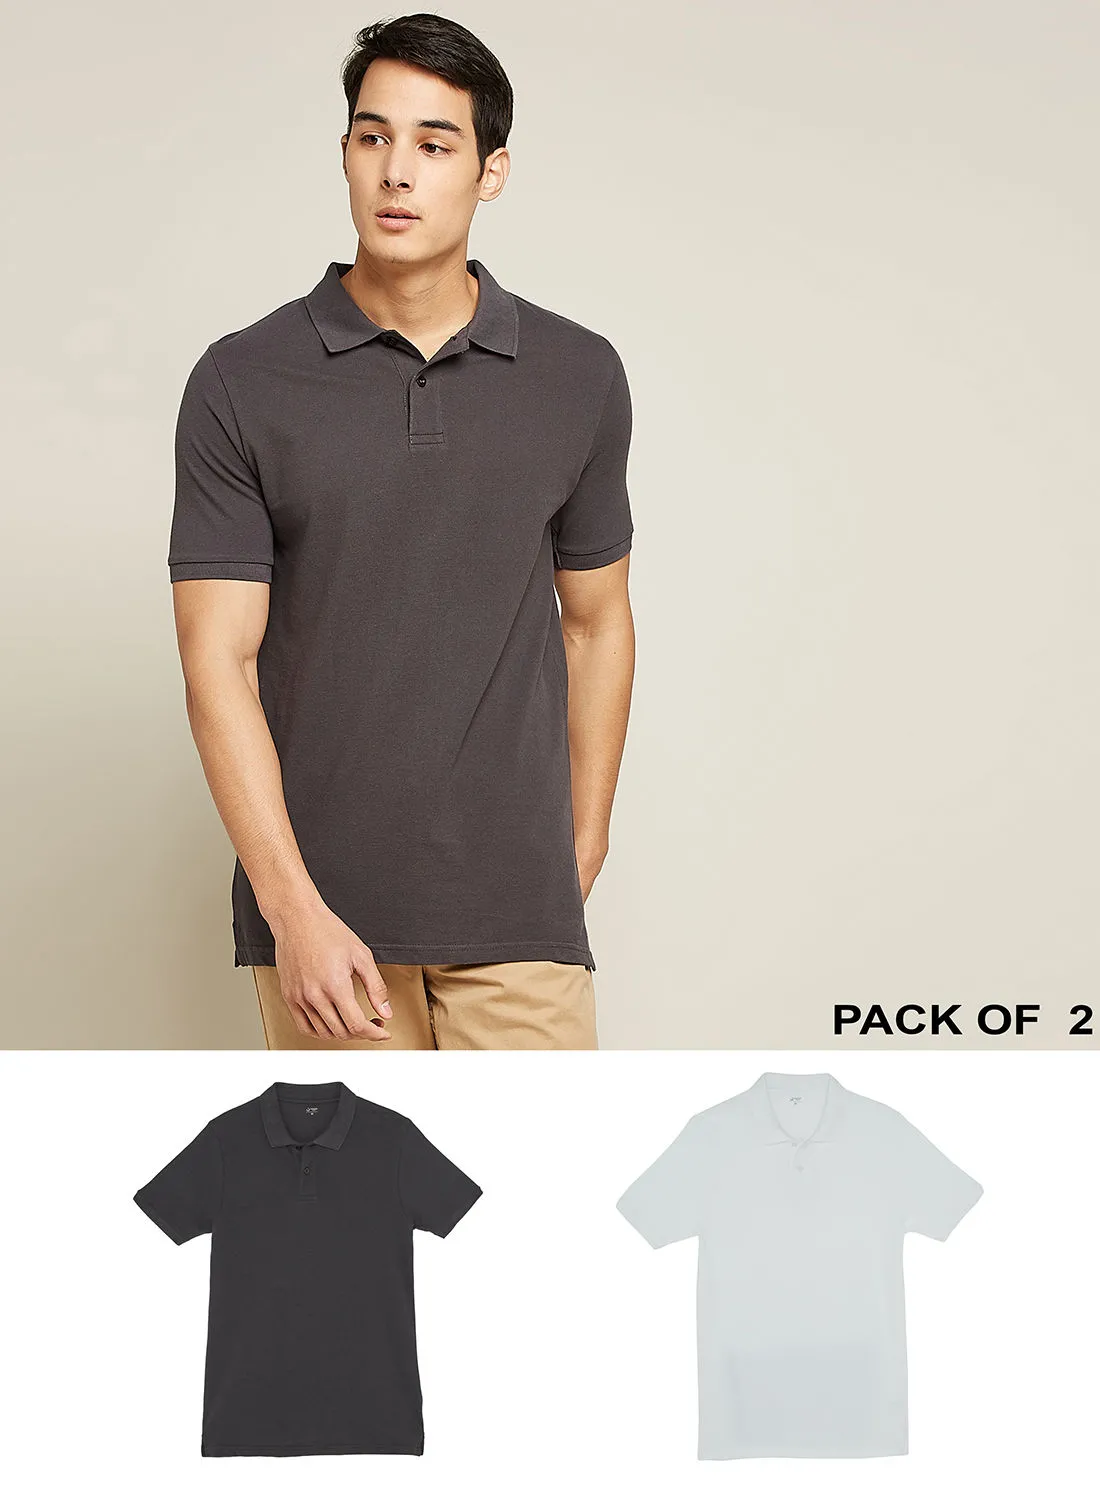 Noon East Pack Of 2- Men's Polo Neck T-Shirt, 100% Cotton Biowashed Fabric, Comfort Fit Stylish Design Dark Grey/ White